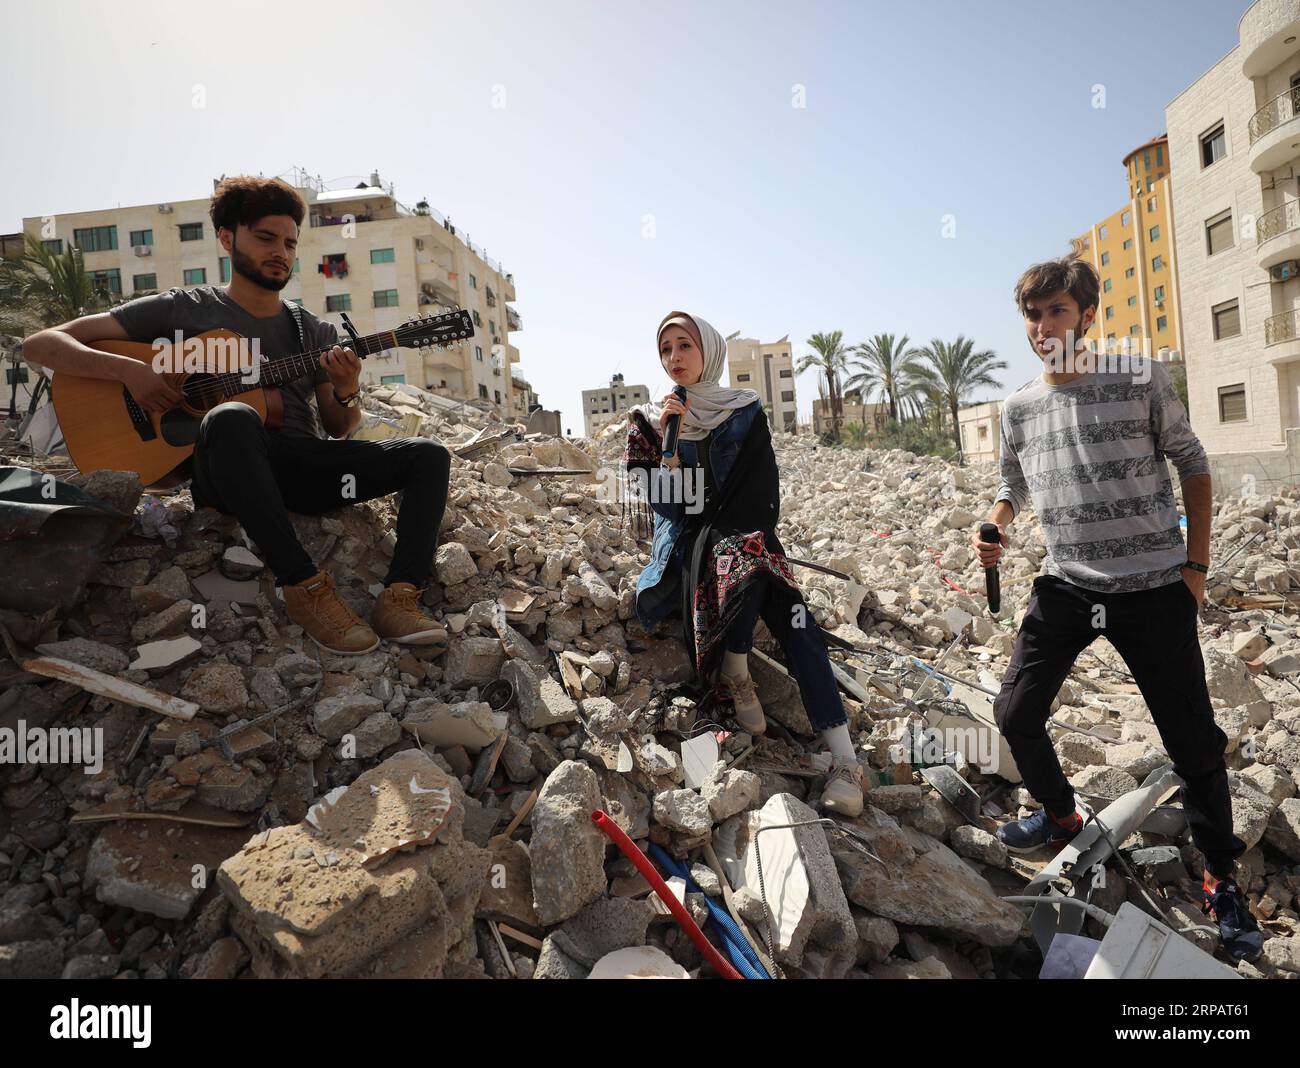 (190518) -- GAZA, May 18, 2019 -- Palestinian artists perform on the rubble of a building that was recently destroyed by Israeli airstrikes, in Gaza City, May 18, 2019. On the ruins of a residential building in the Gaza Strip destroyed by Israeli war jets, a group of Palestinian singers on Saturday sent out an anti-Israeli message to the Eurovision Song Contest being held in Israel. Yasser Qudih) MIDEAST-GAZA-MUSIC-ANTI-ISRAEL MESSAGE zhaoyue PUBLICATIONxNOTxINxCHN Stock Photo